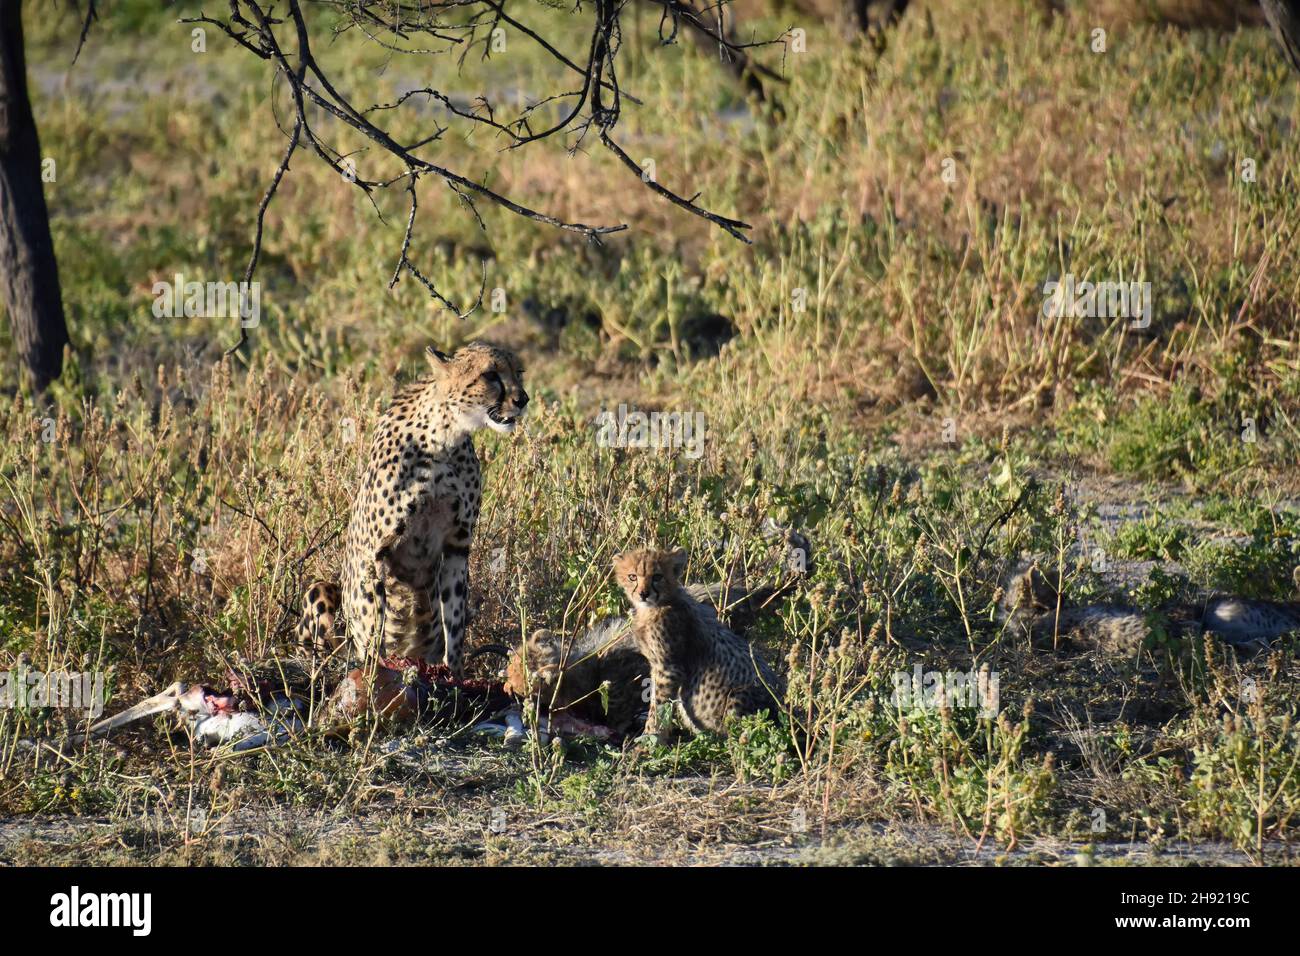 A cheetah in Etosha Namibia near a springbok that was killed to feed her cubs Stock Photo